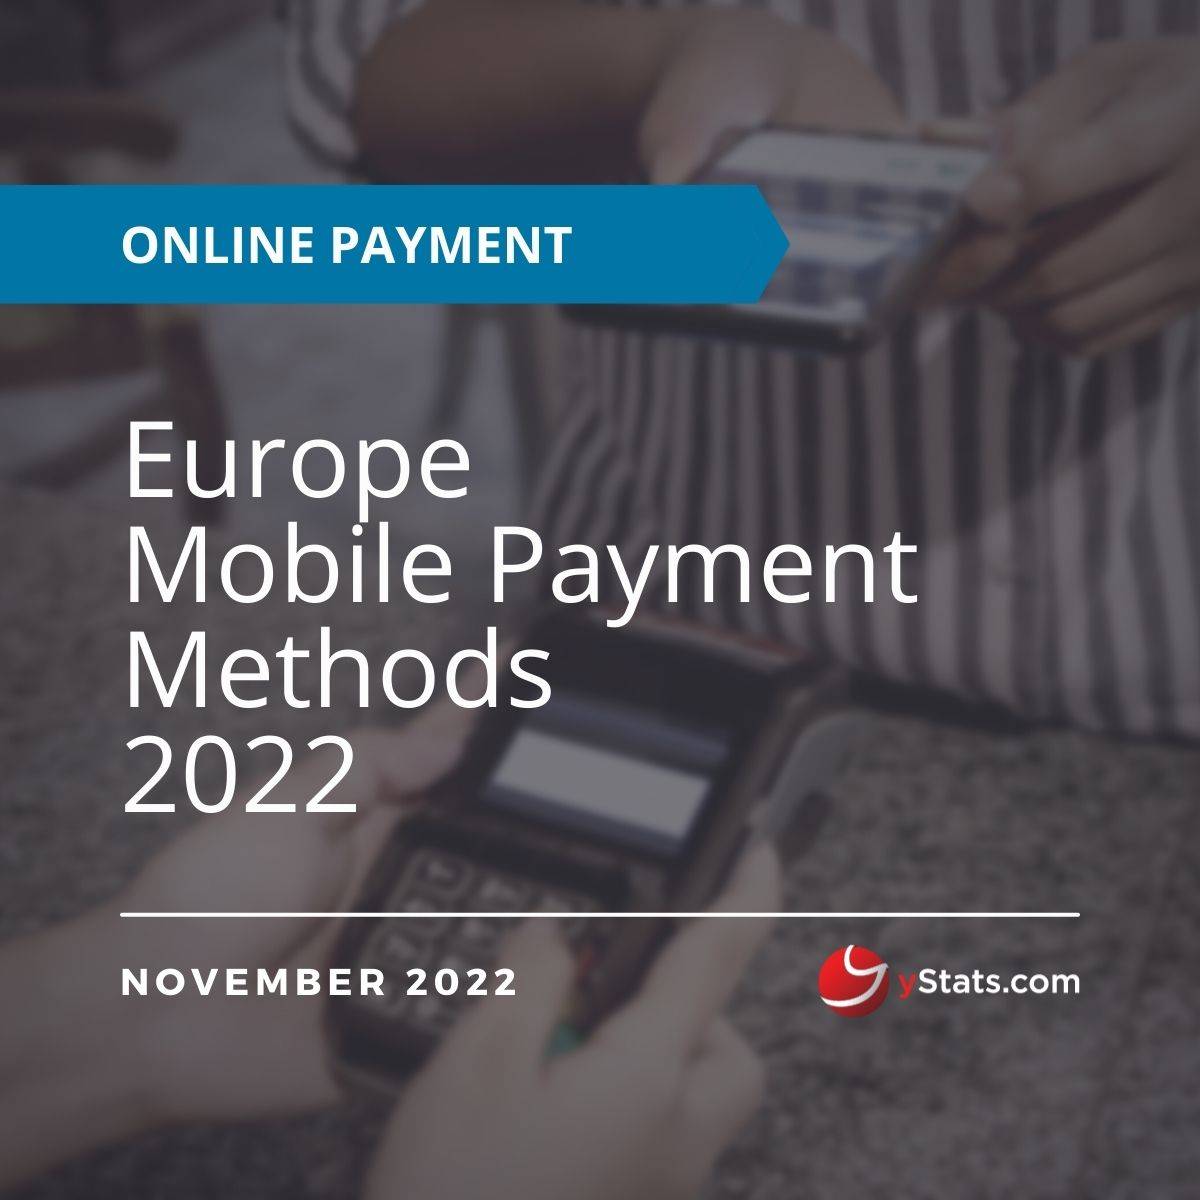 Europe Mobile Payment Methods 2022 Market Report